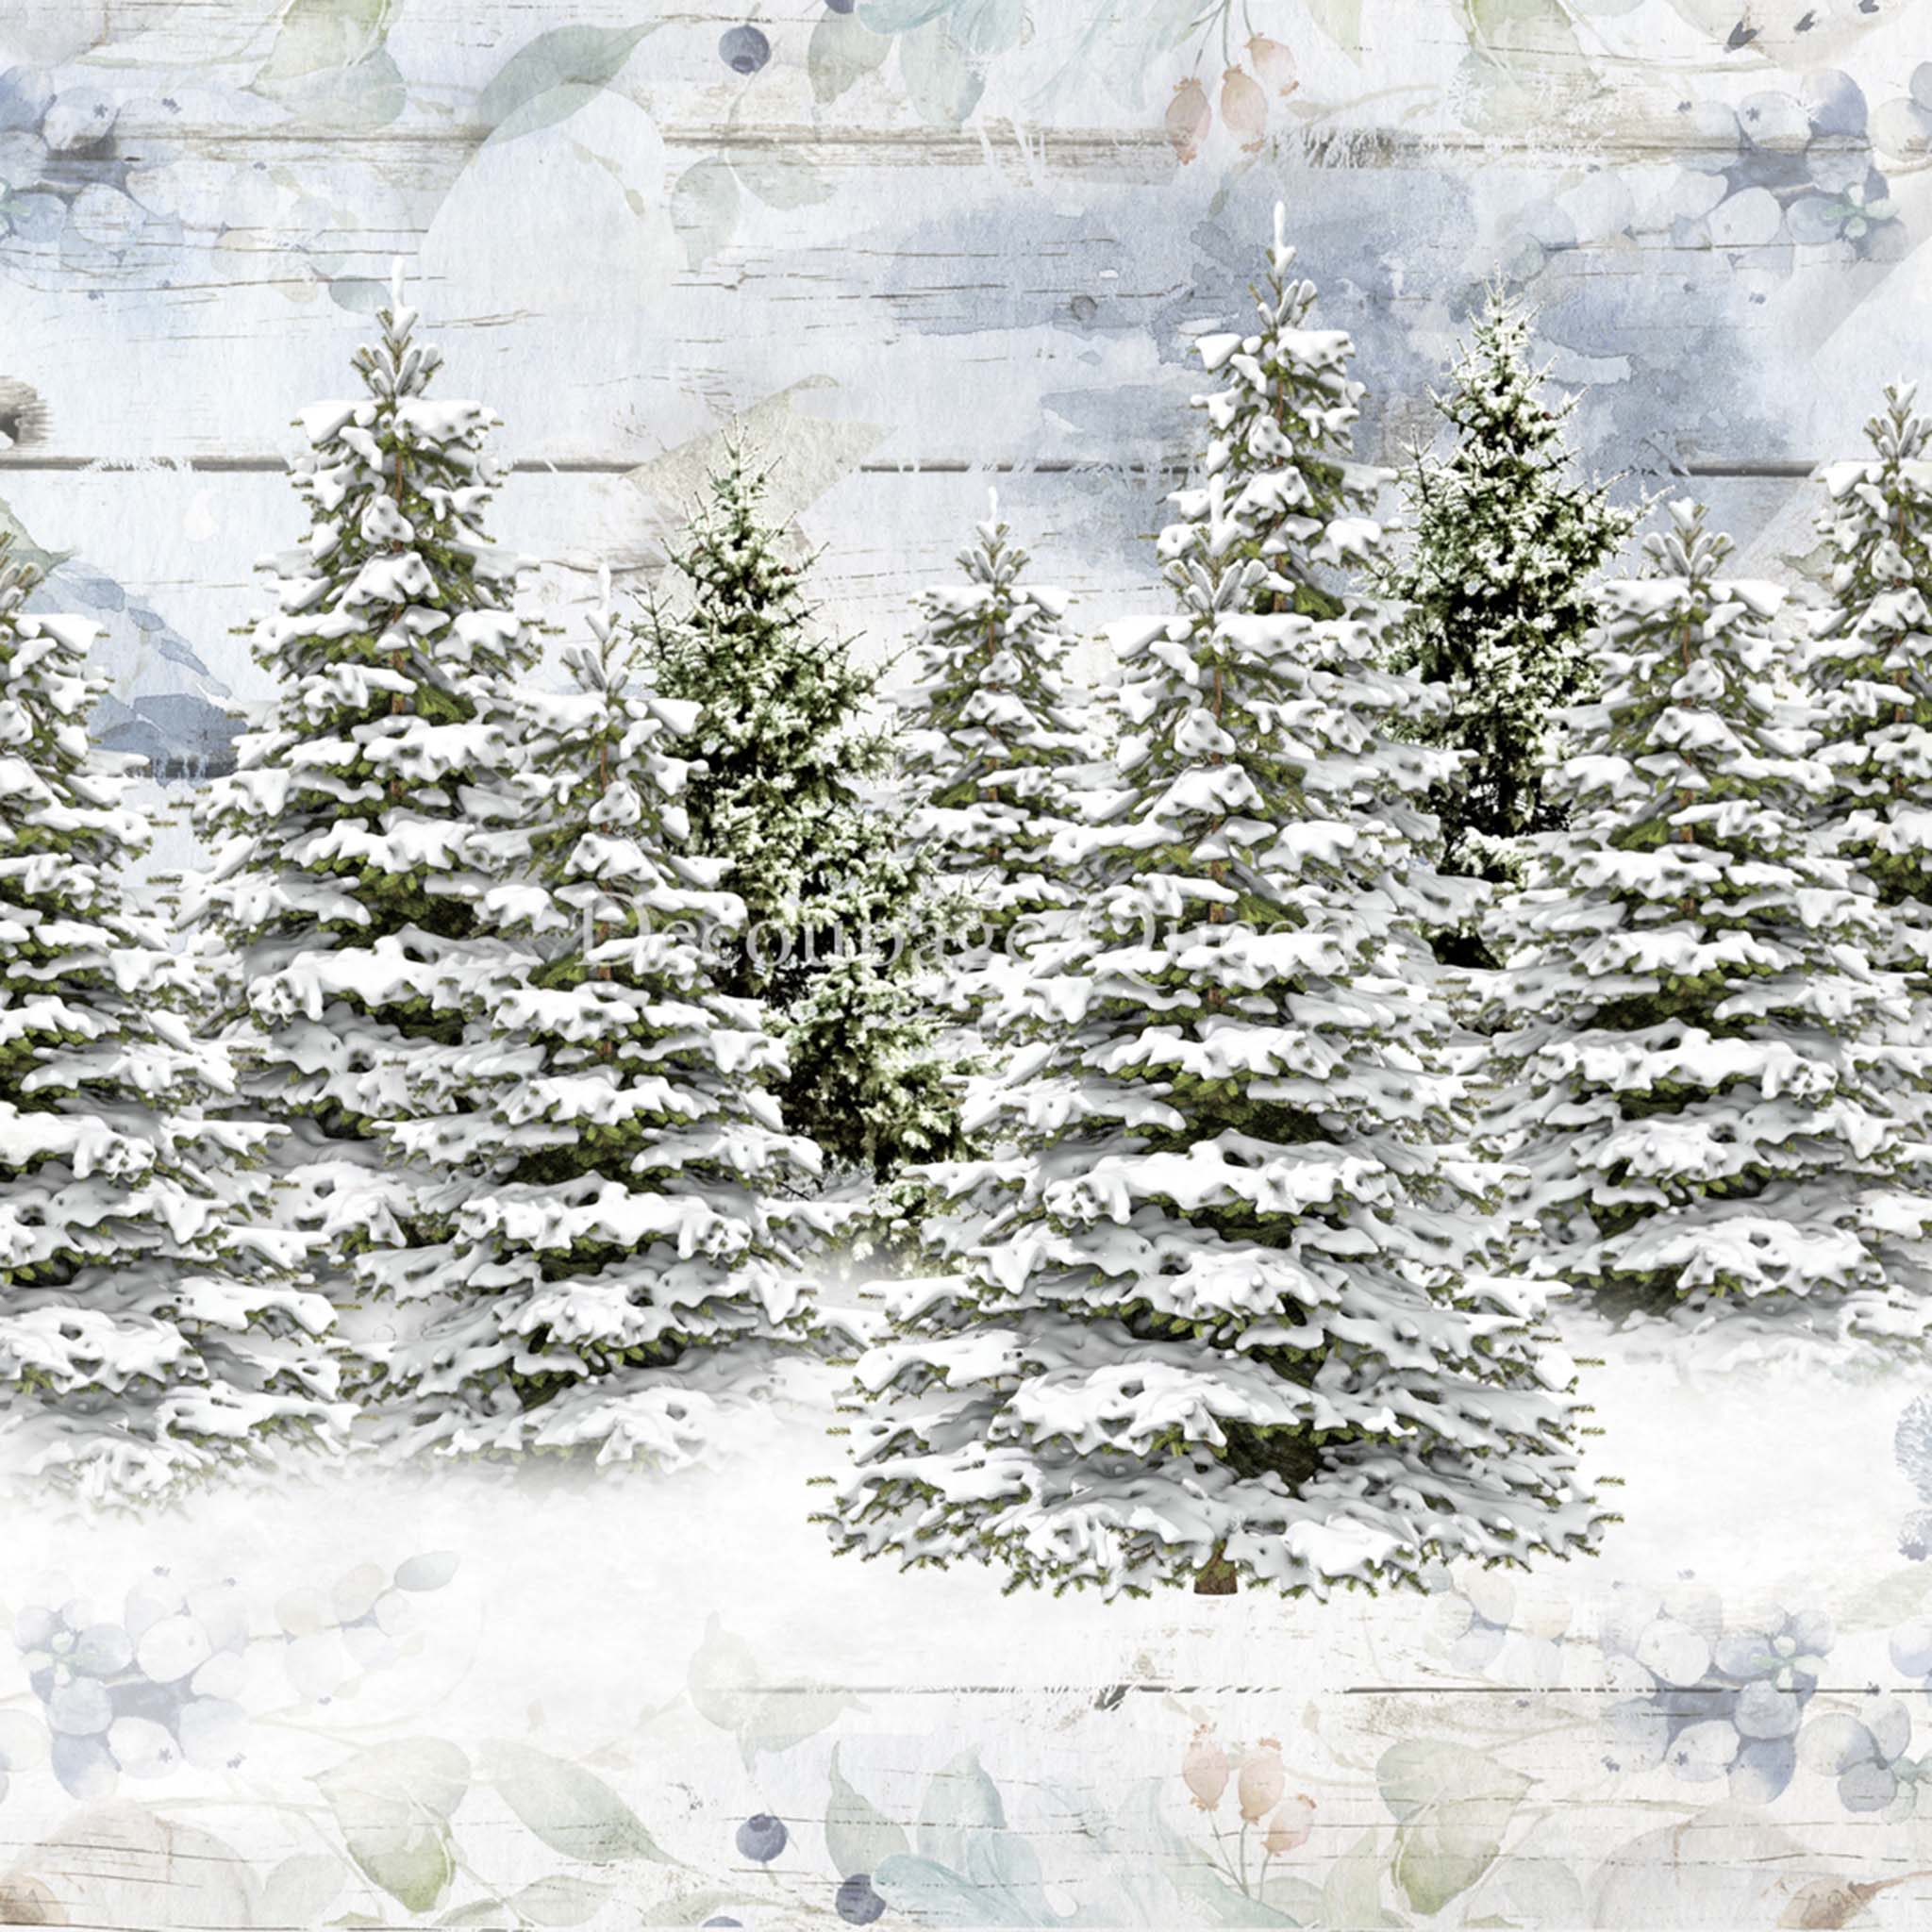 A4 rice paper design featuring a snowy scene full of pine trees.